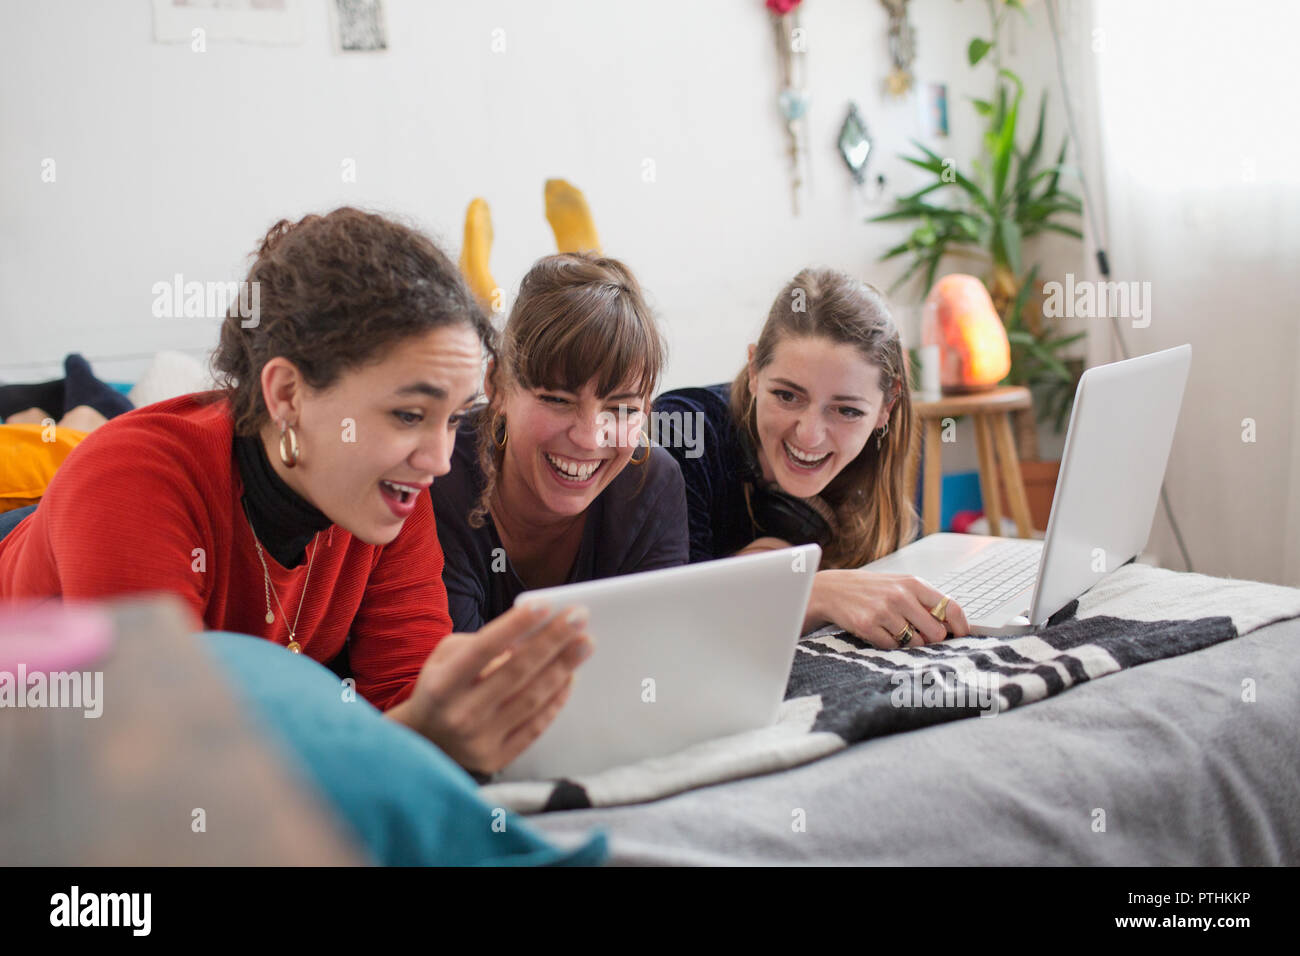 Young women friends hanging out, using digital tablet and laptop on bed Stock Photo